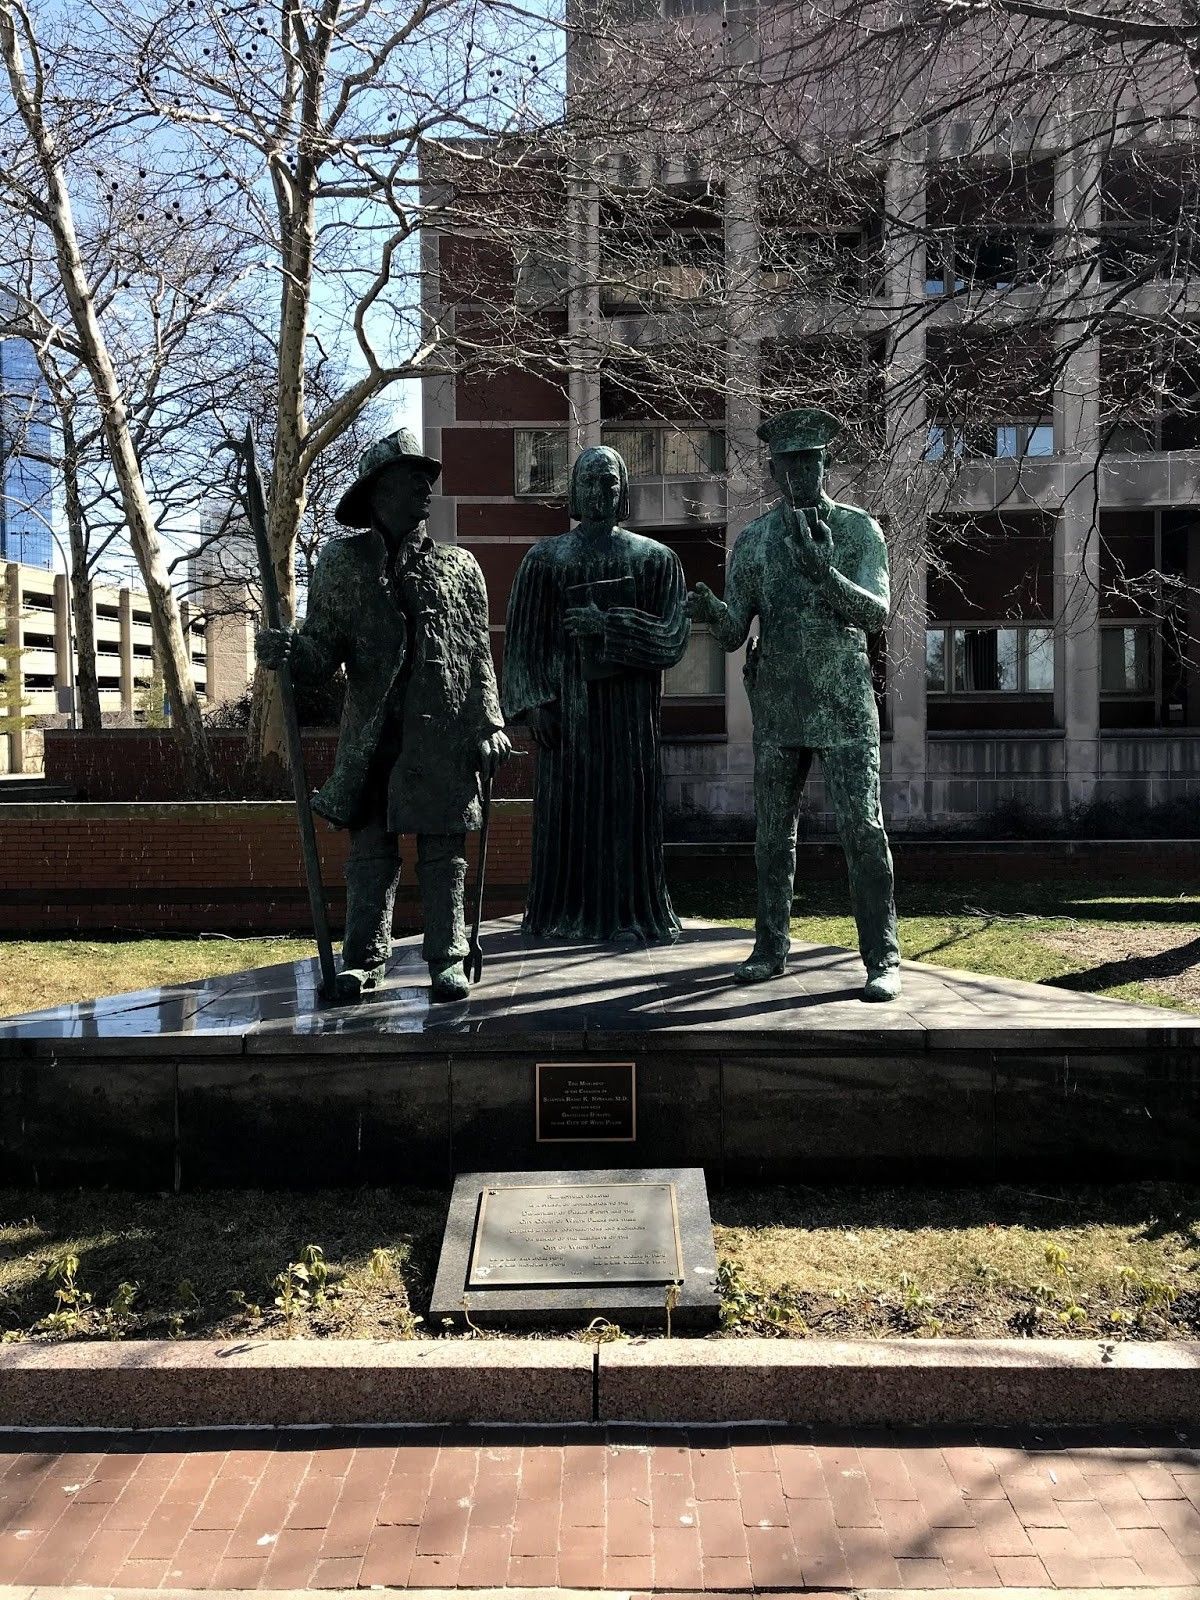 Three Statues in White Plains, NY